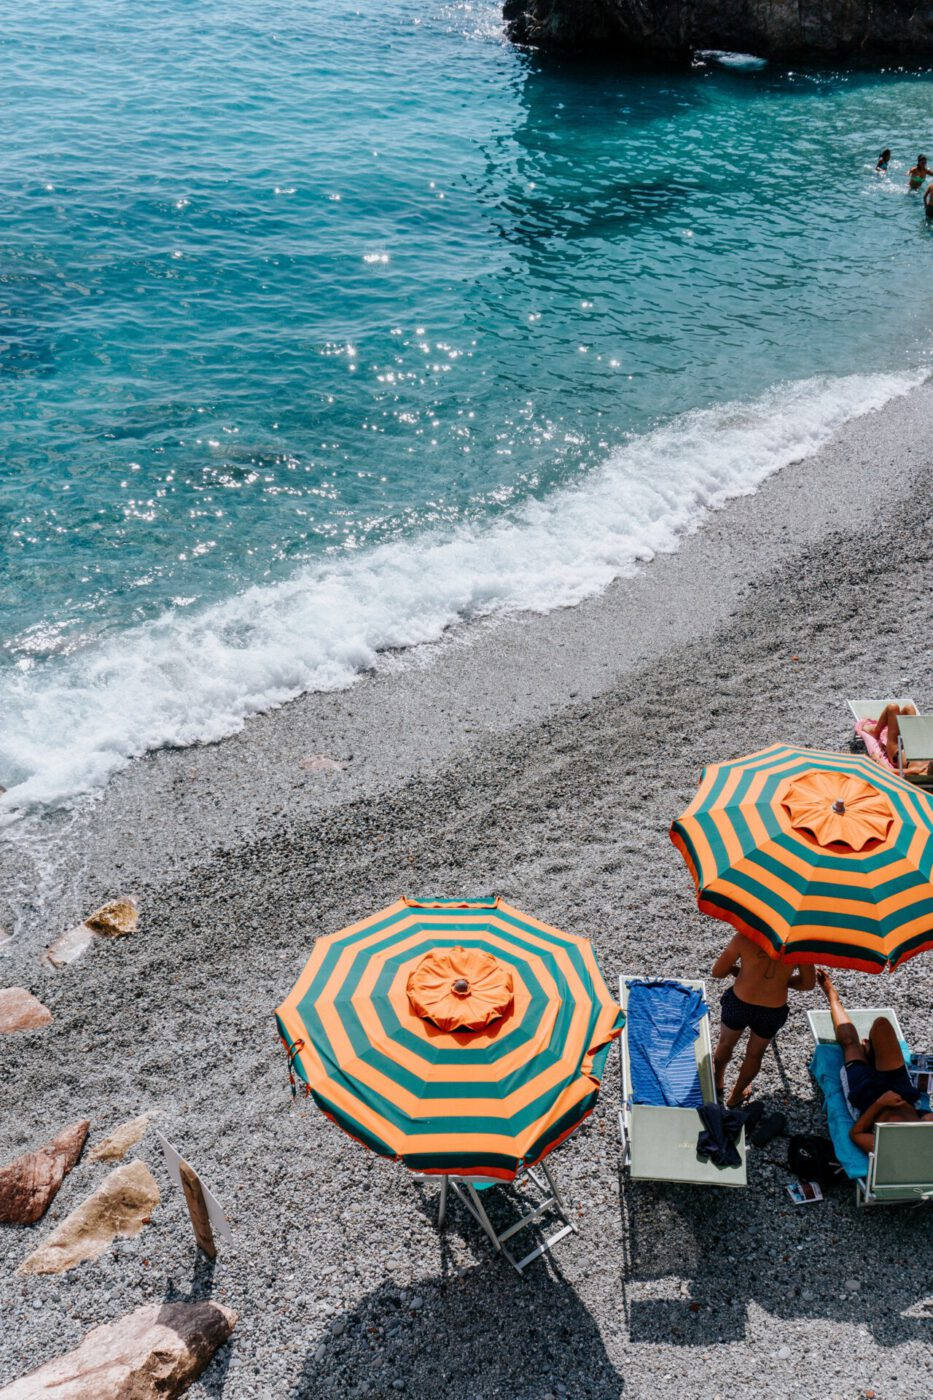 Aesthetic Beach Vibes With Colorful Umbrellas